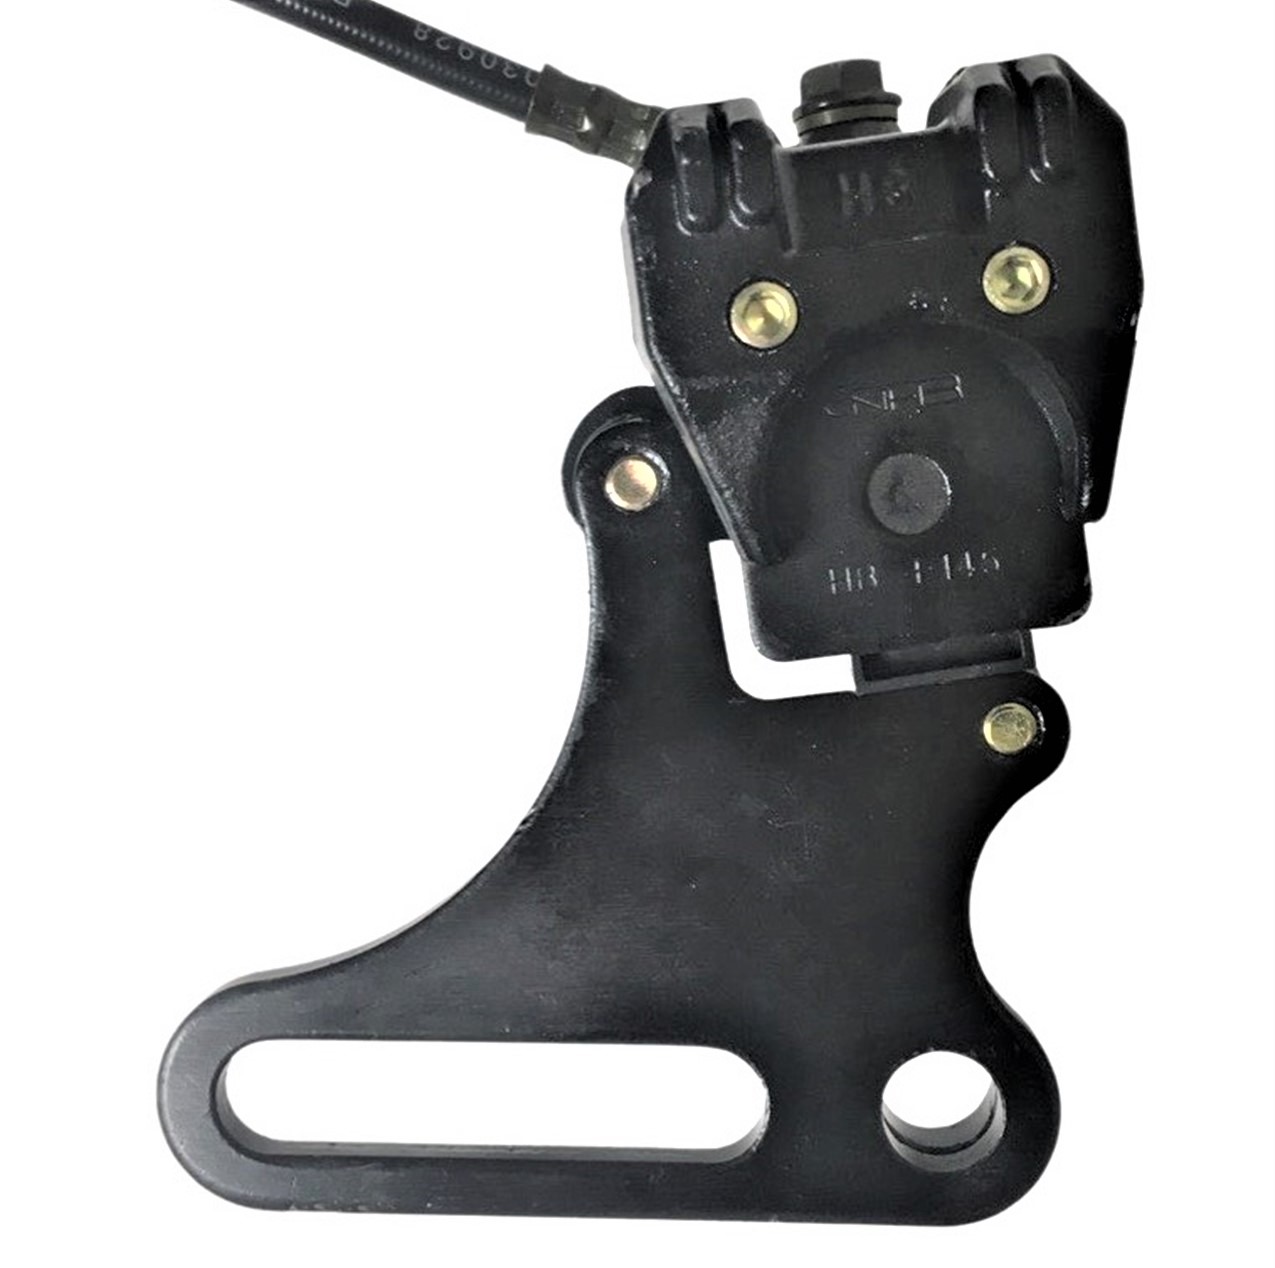 Rear Foot Brake Assembly Fits Many ATVs & DirtBikes Caliper Bolts c/c=25-86mm, Line L=22in, Master Cylinder Bolts c/c=40-55mm, Rod Length-From Body to Center of Connector Hole=105mm